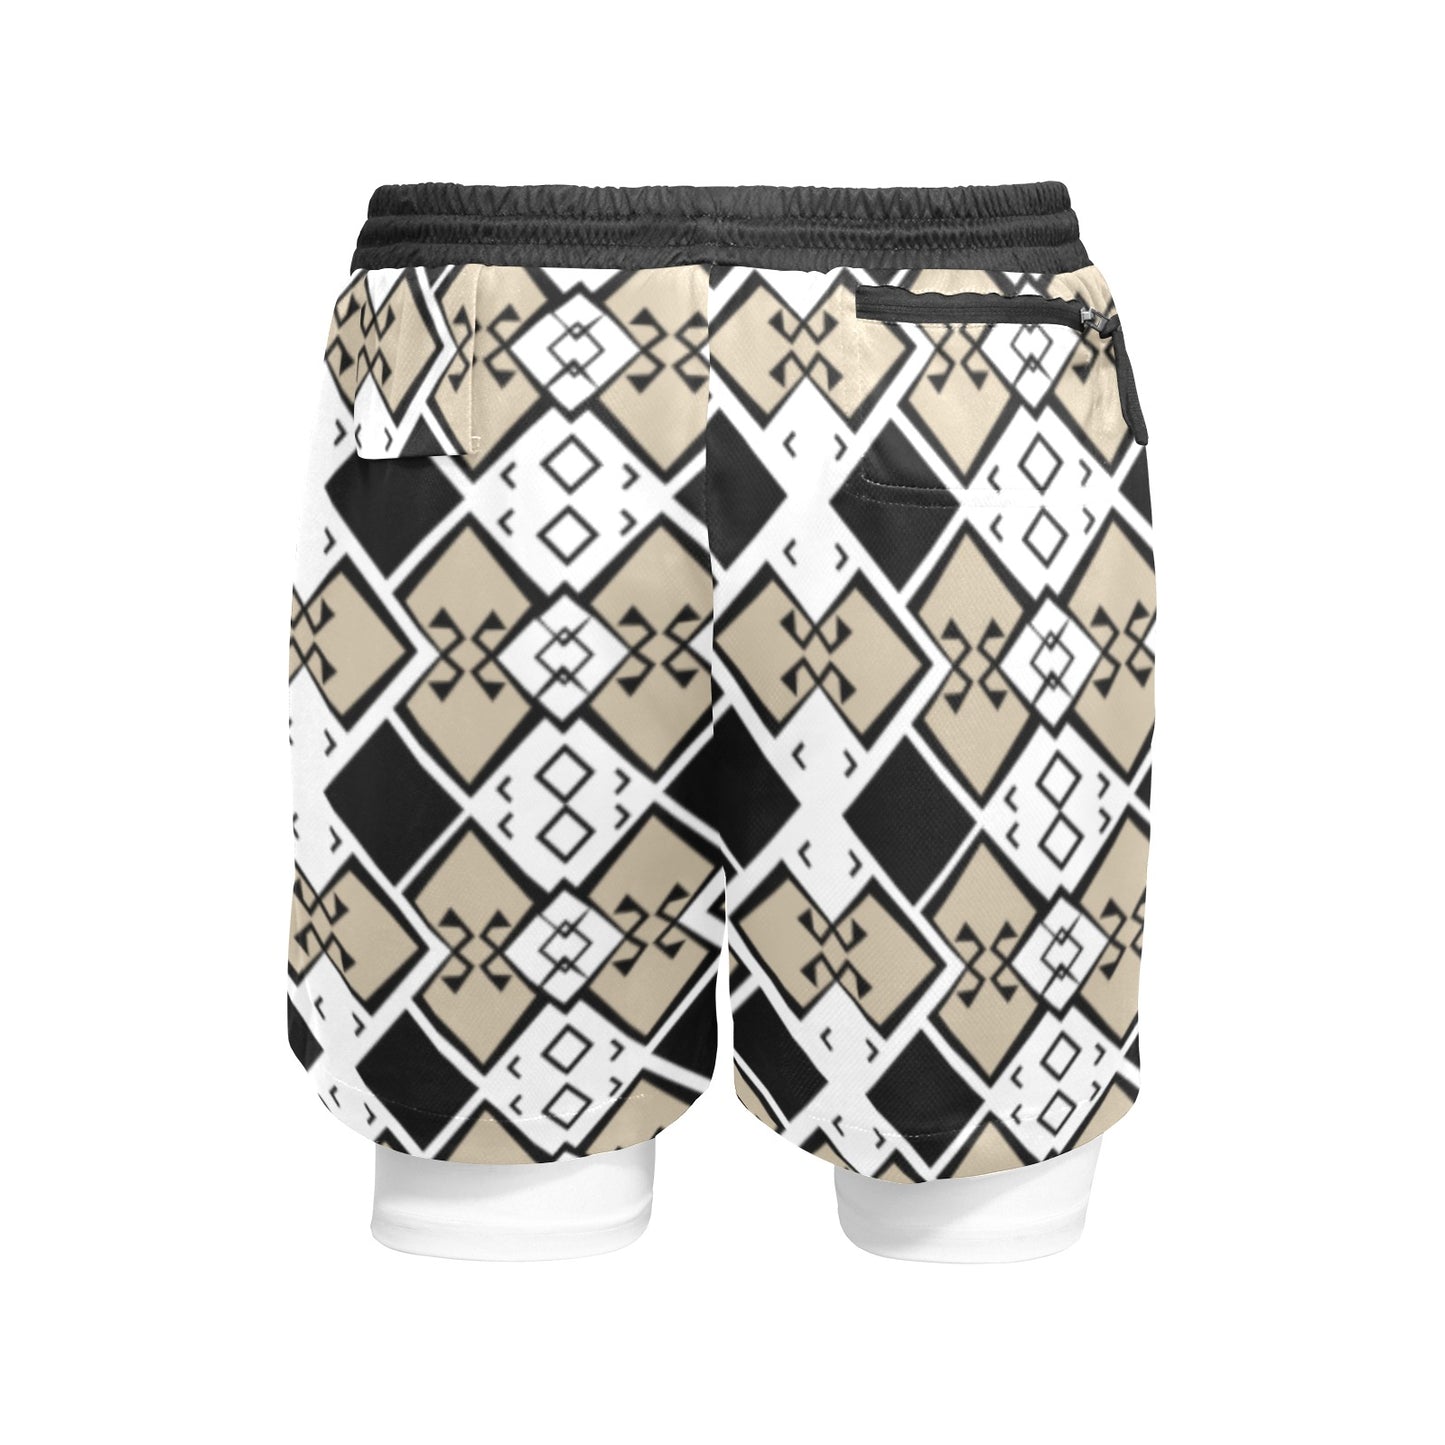 Aztec Print Men’s Sports Shorts with insert white tights